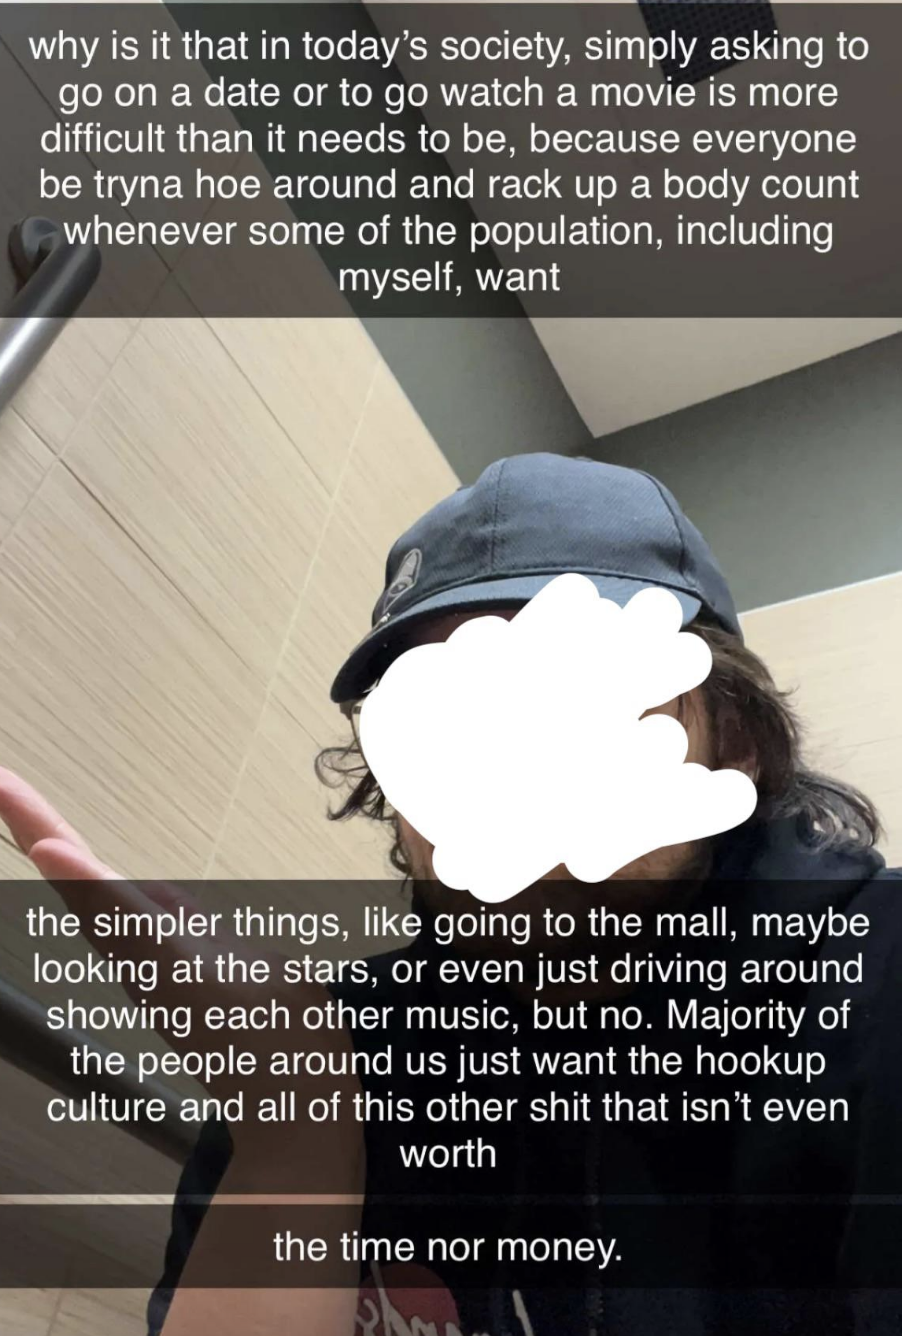 Selfie Snapchat of man: &quot;Why is it that in today&#x27;s society, simply asking to go on a date is more difficult than it needs to be&quot;